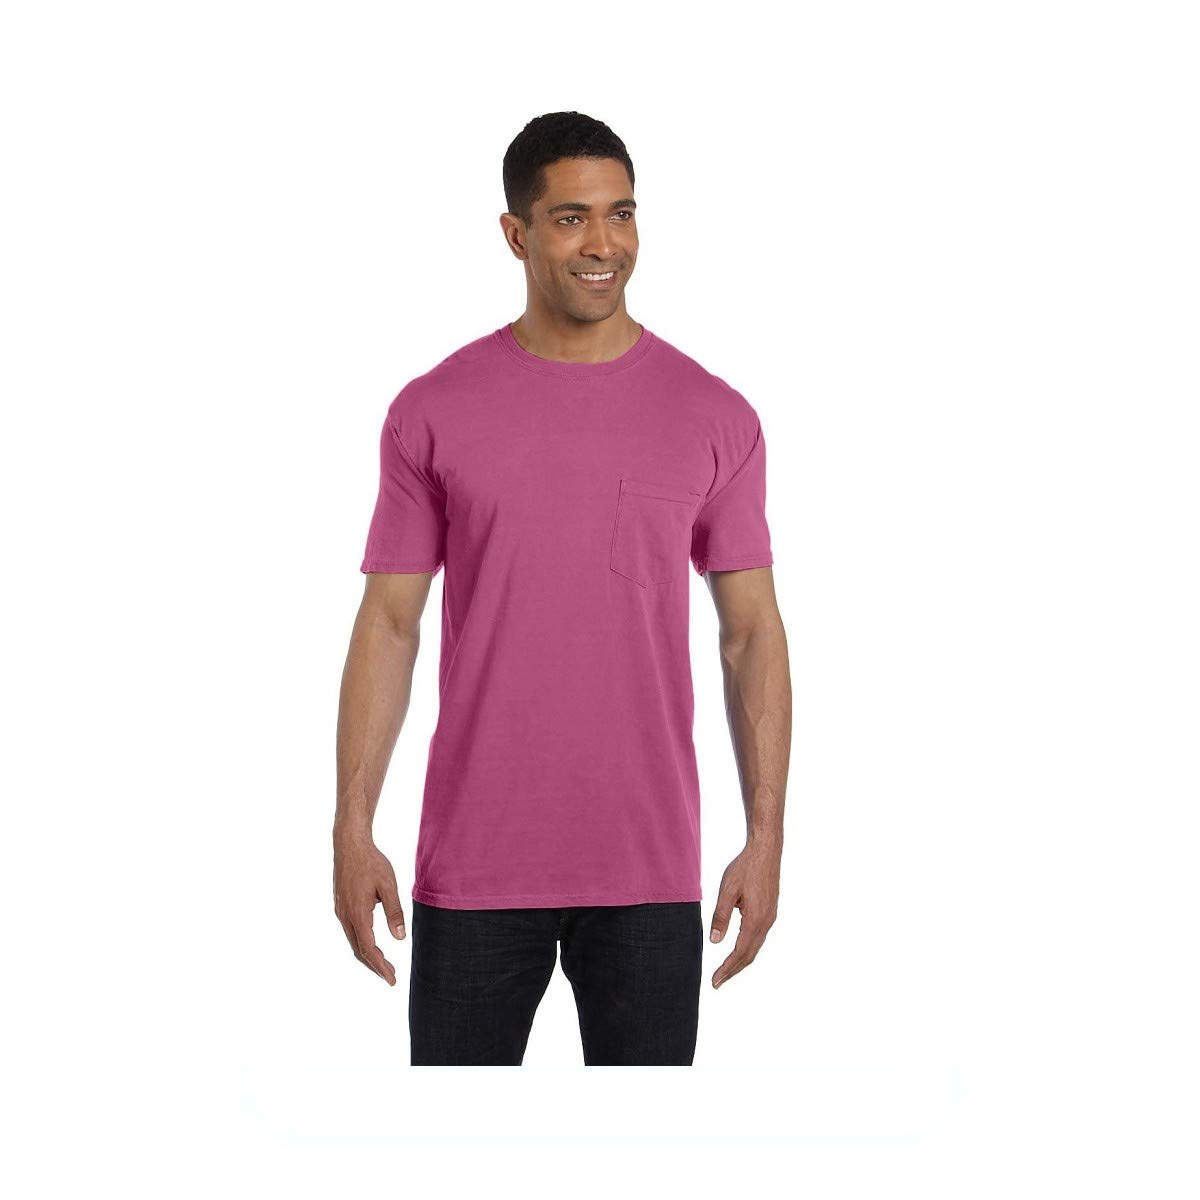 Comfort Colors Mens Adult Short Sleeve Pocket Tee, Style 6030 (Small, Orchid)